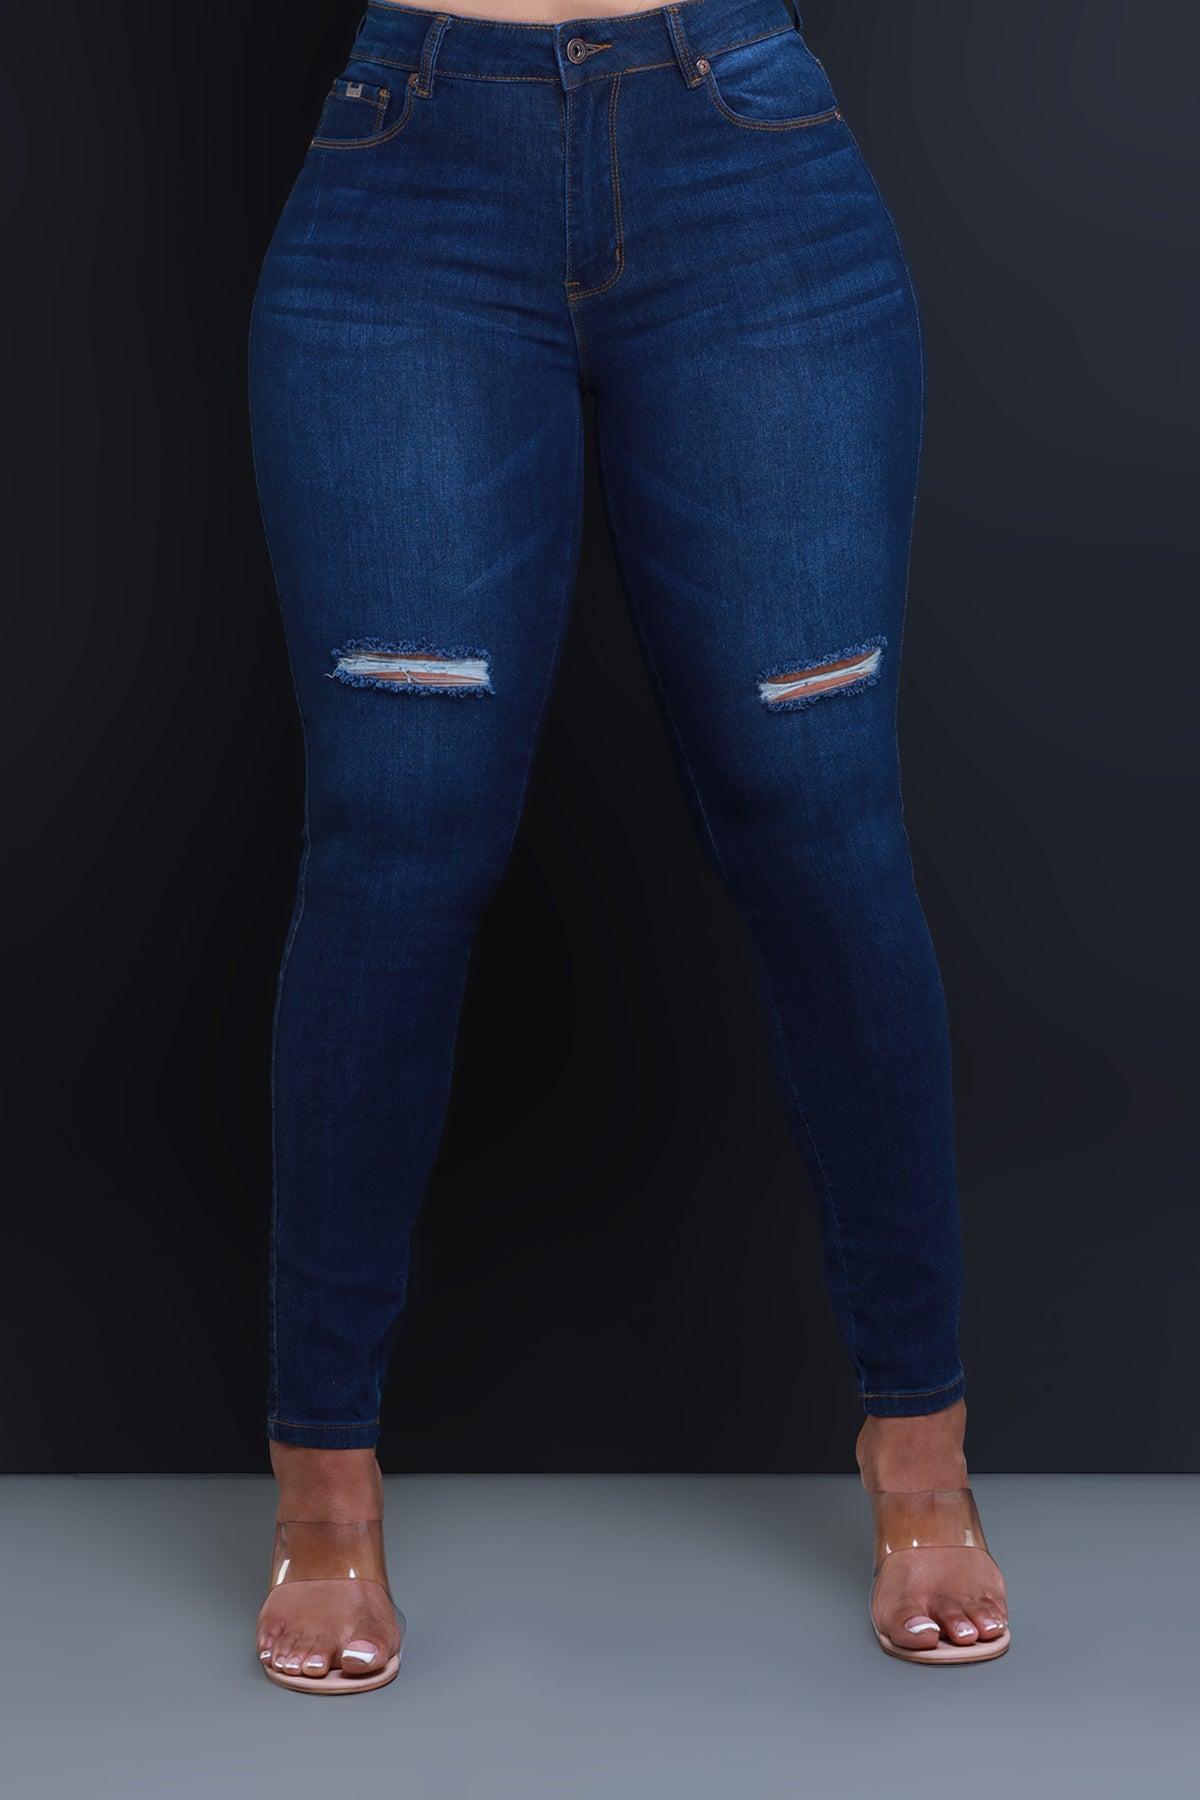 
              Steal The Show Hourglass High Rise Ripped Stretchy Jeans - Dark Wash - Swank A Posh
            